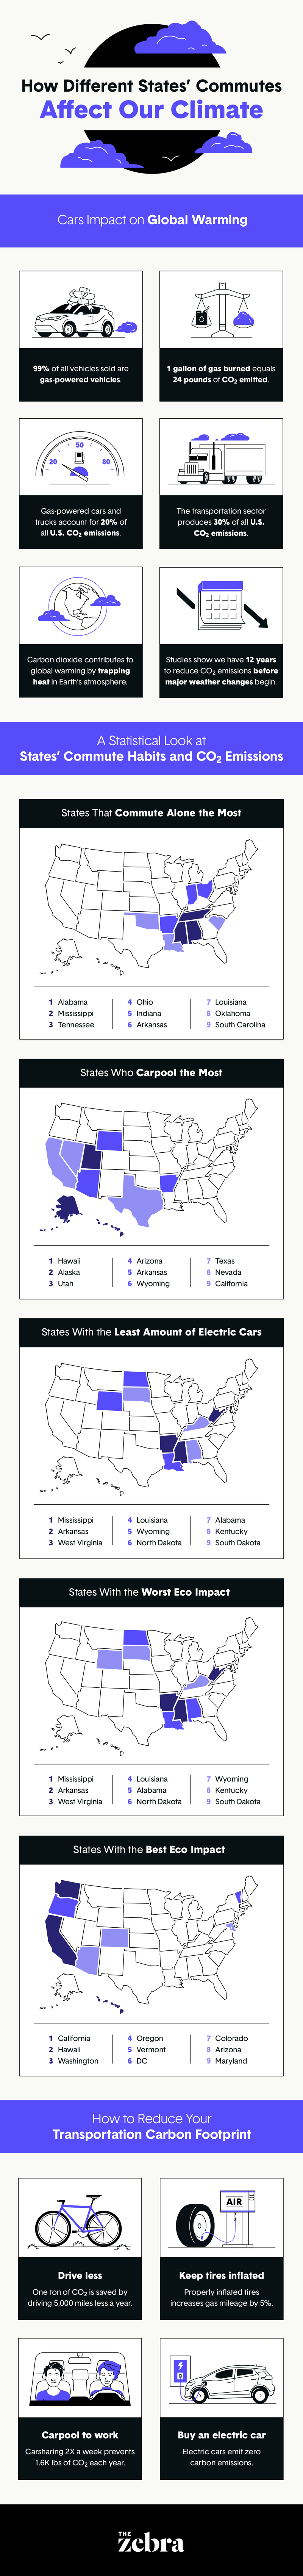 how-different-states-commutes-affect-our-climate-purple.png